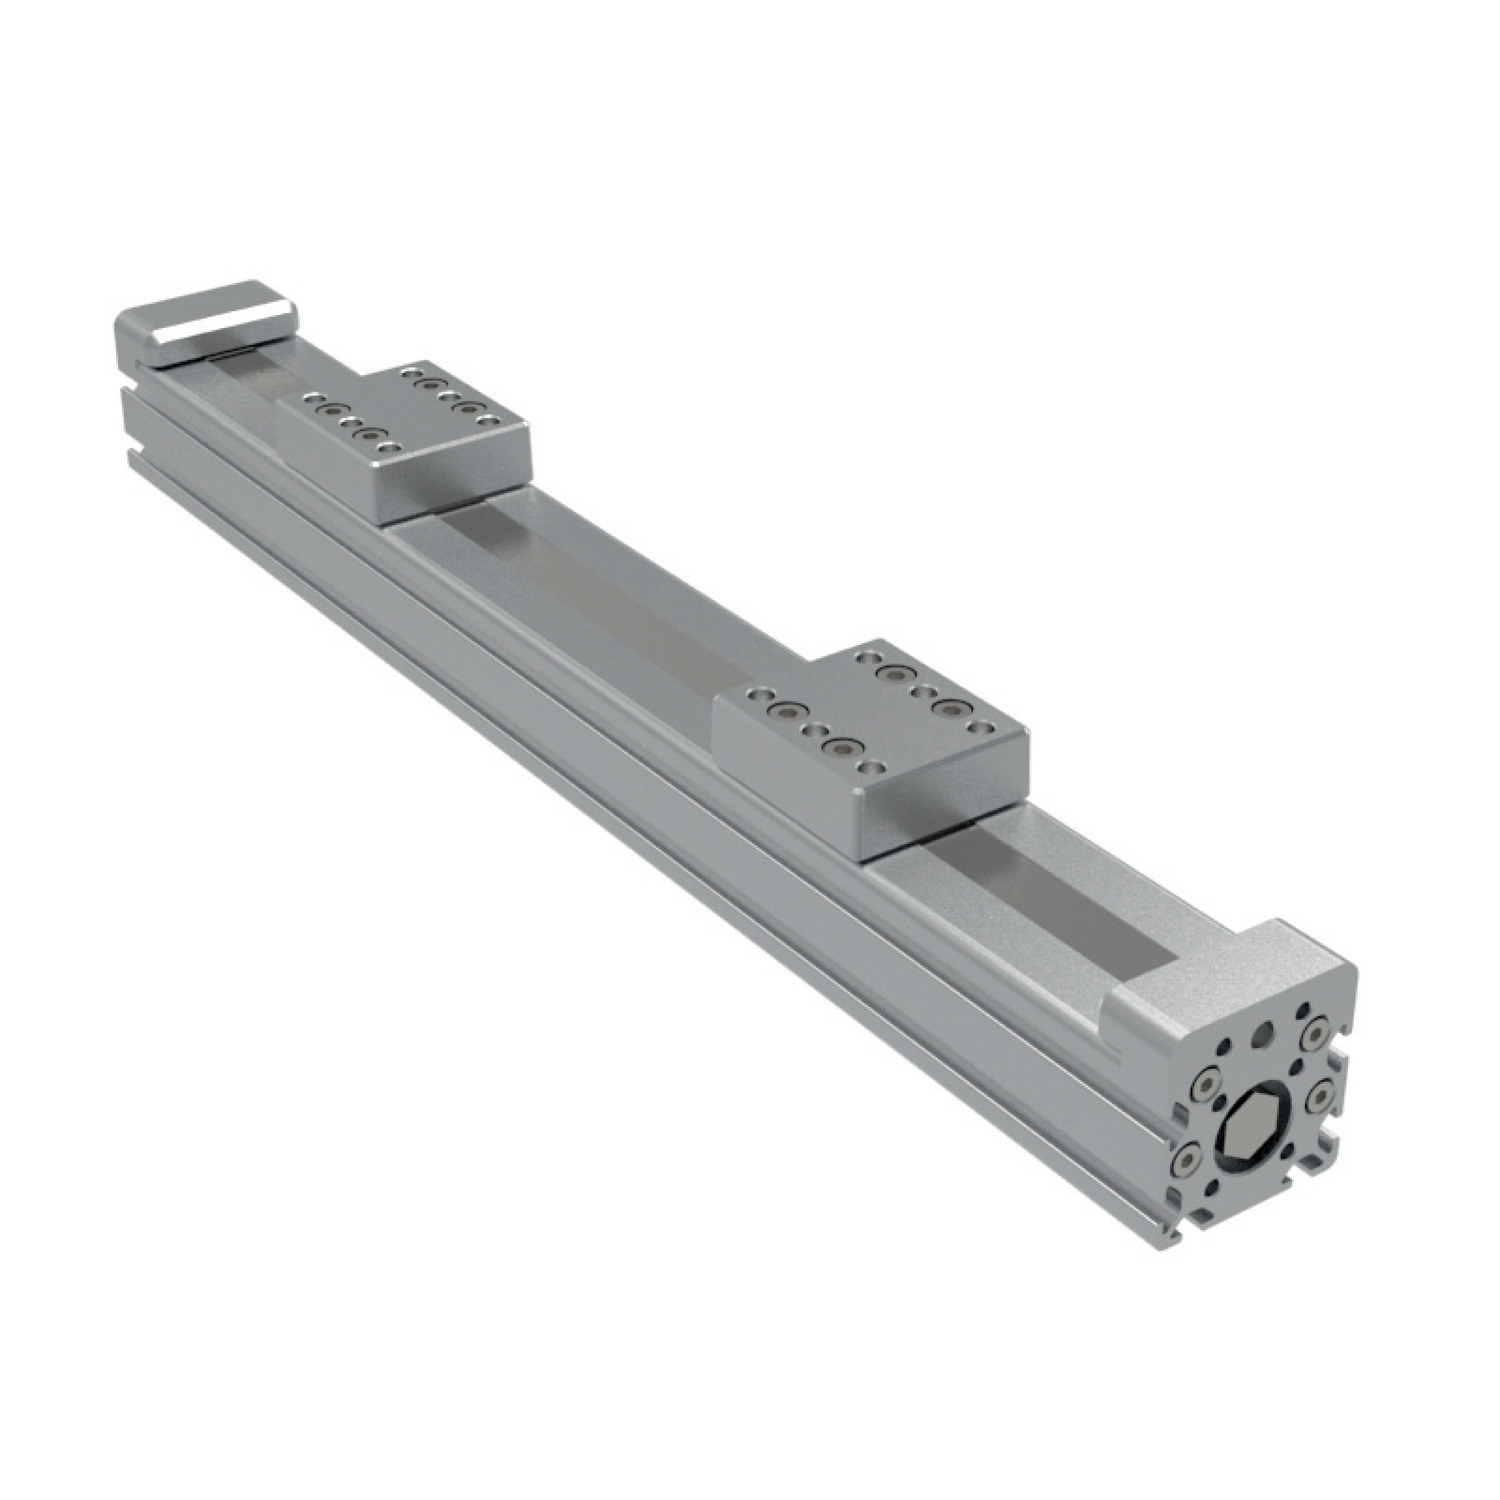 Product L3147.D, Lead Screw Linear Stages double carriage / 